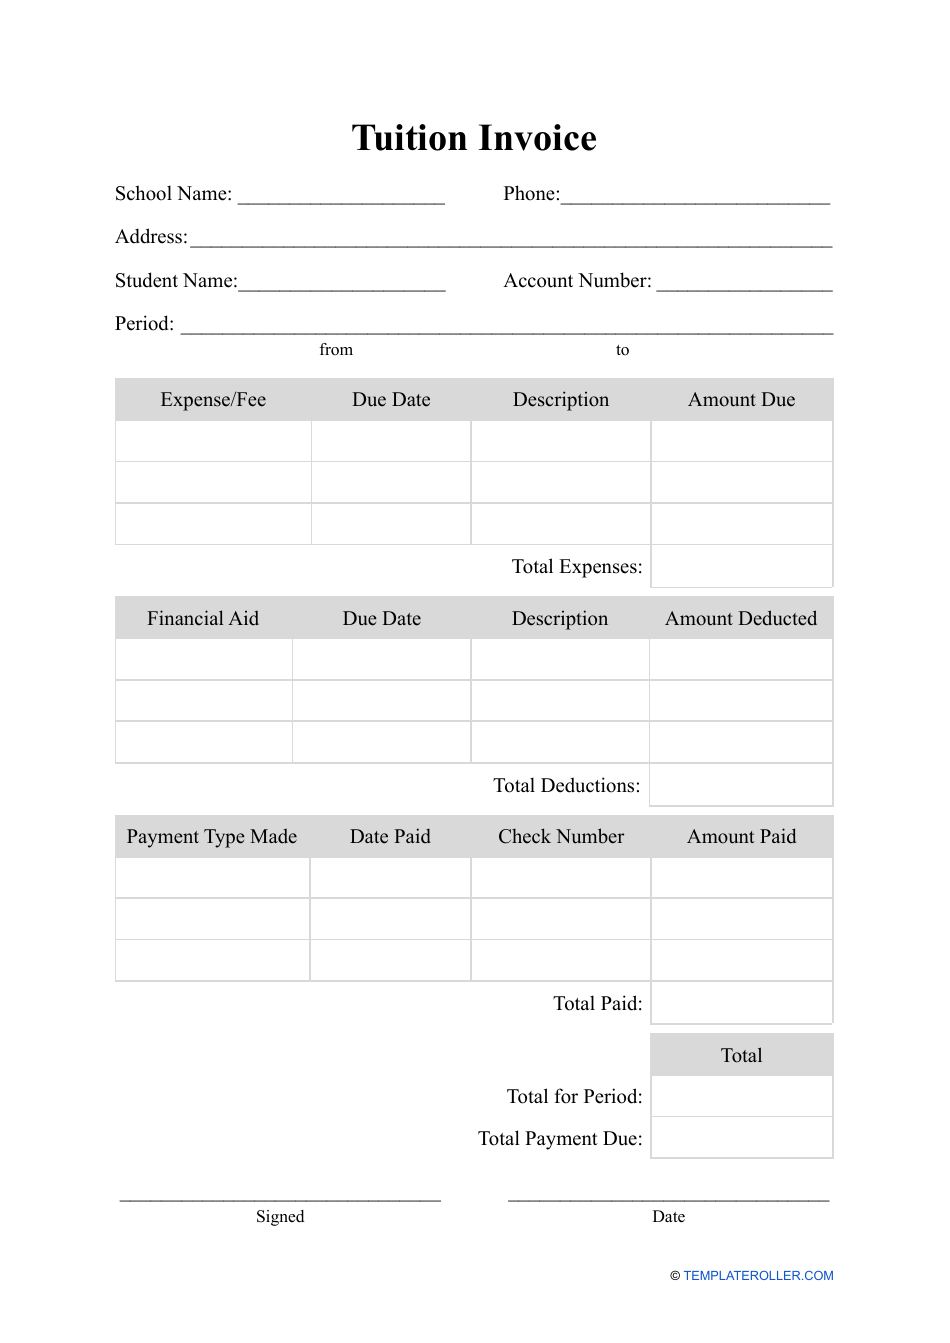 Tuition Invoice Template Fill Out, Sign Online and Download PDF